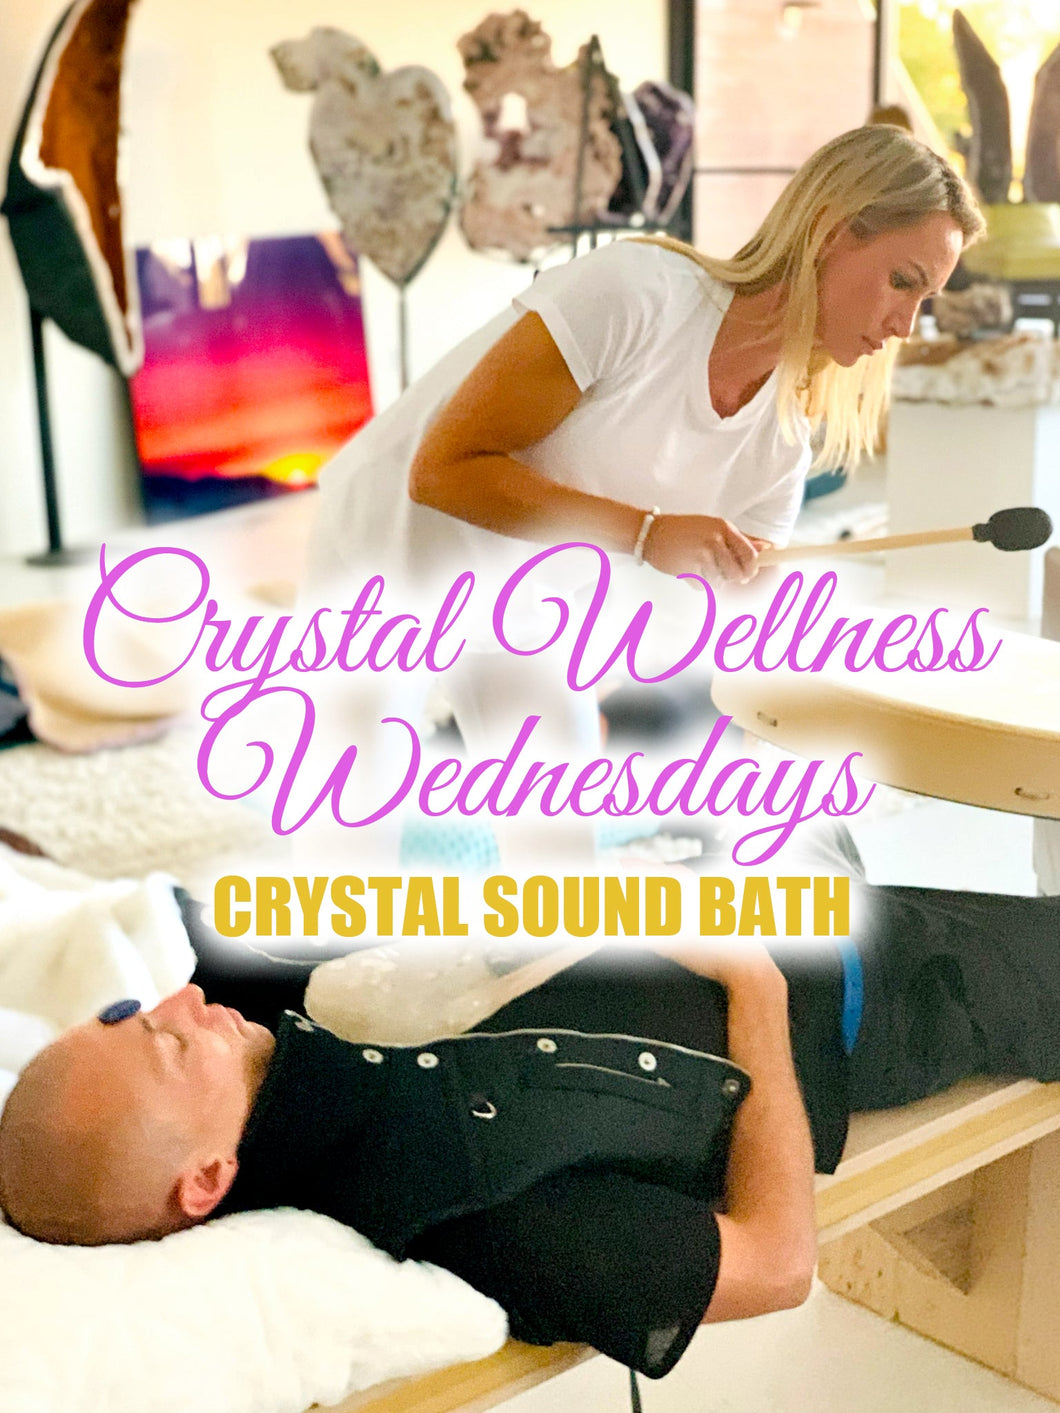 $111 TICKET Wednesday 12/21/22 Immersive Soundbath w/ Stephanie Lekkos & Sacred Toning and Interactive Crystal Healing Stations curated by Lenise Sorén